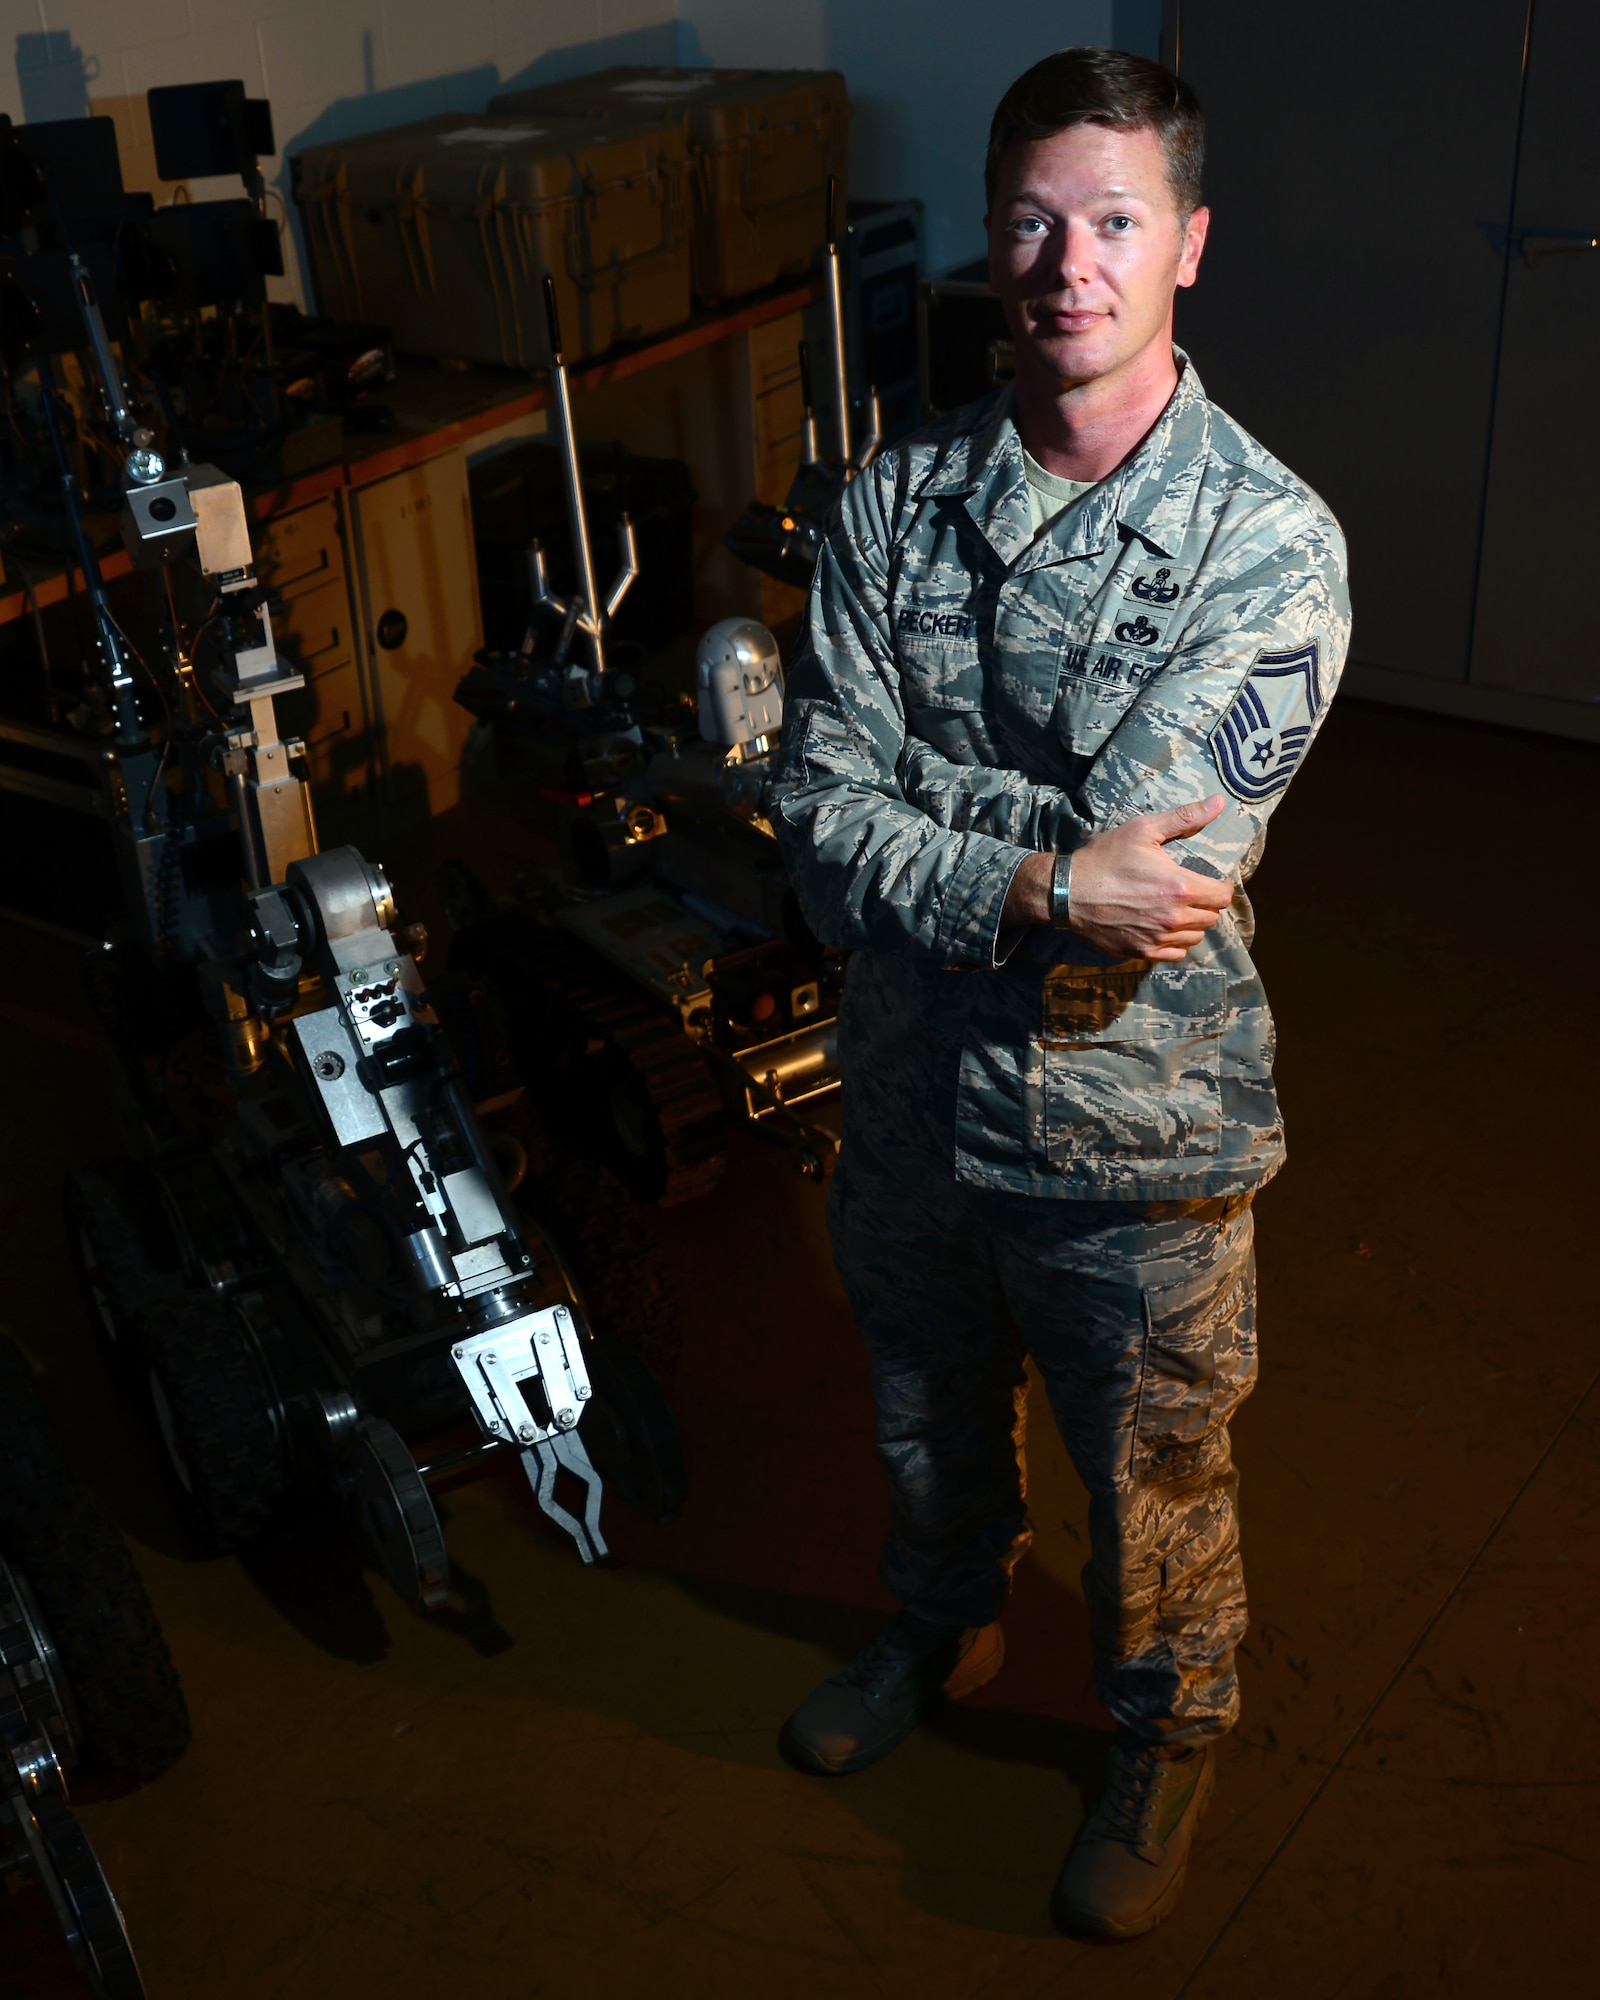 U.S. Air Force Senior Master Sgt. Michael Becker, the explosive ordnance disposal (EOD) flight chief assigned to the 509th Civil Engineer Squadron, poses next to a F6A robot at Whiteman Air Force Base, Mo., Aug. 22, 2016. Becker is the Air Force recipient of the 2016 Jewish Institute for National Security Affairs Grateful Nation Award for his superior conduct in the war on terrorism and designing new state-of-the-art robotics systems to keep Airmen safe inside assault vehicles during missions. (U.S. Air Force photo by Senior Airman Danielle Quilla)